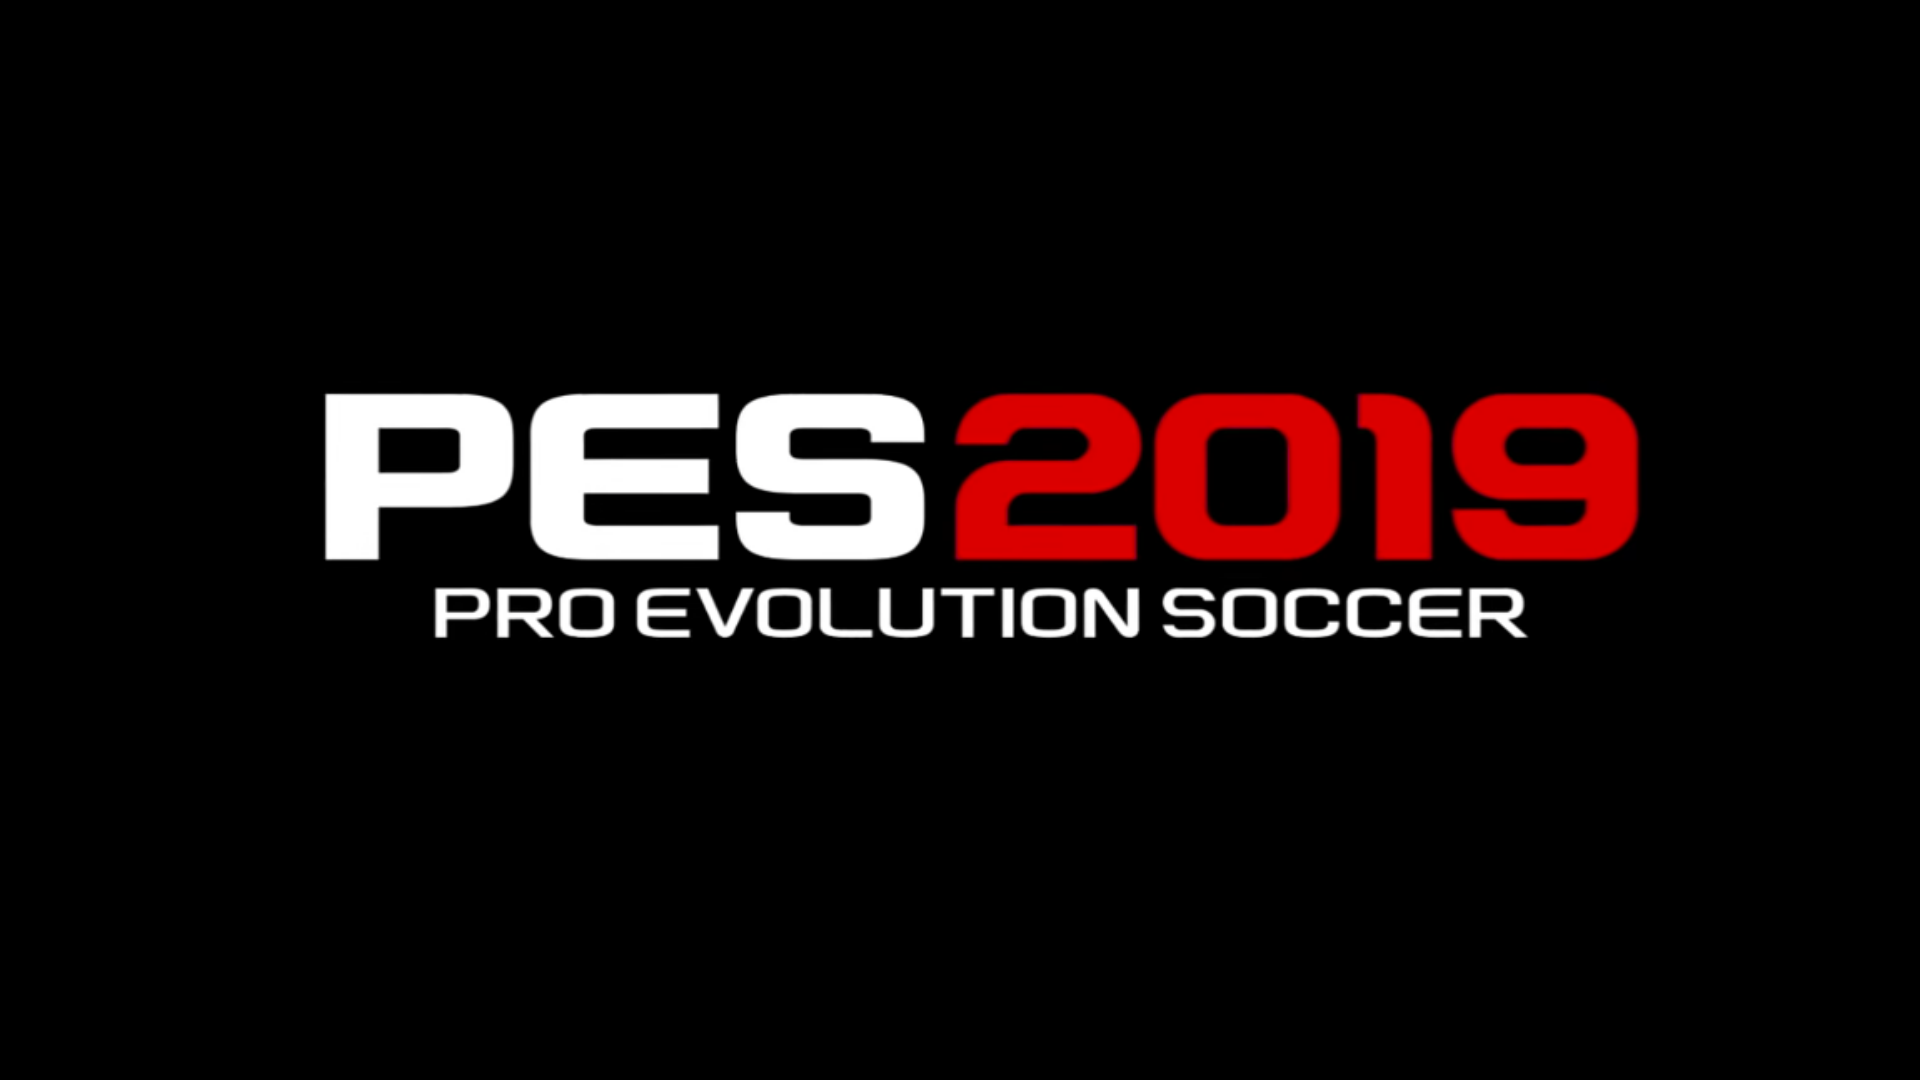 pes demo pc your system does not meet vram